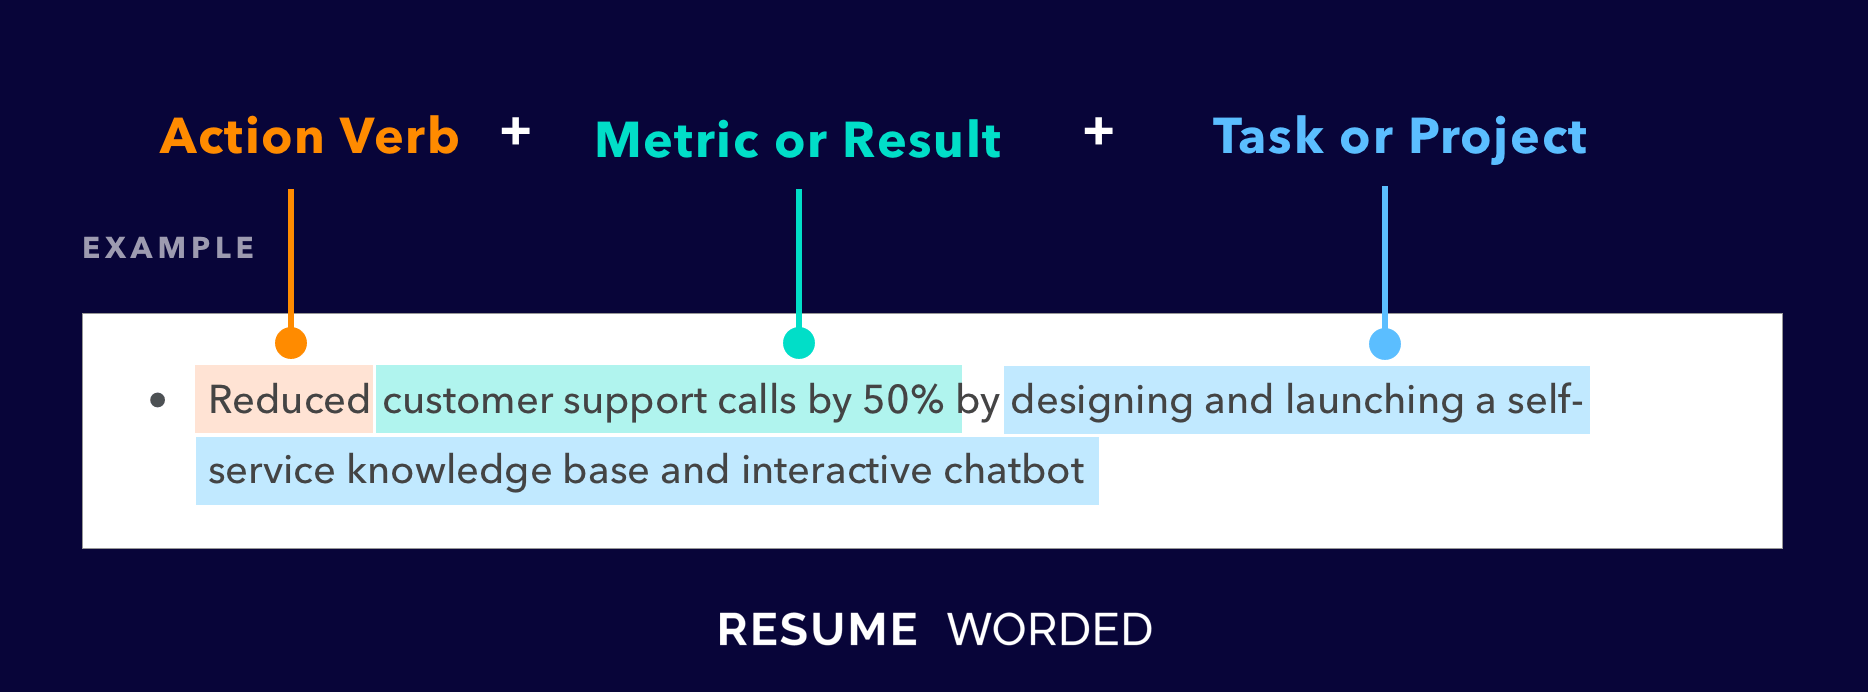 Use metrics to quantify your impact on the bottom line. - Category Manager Resume